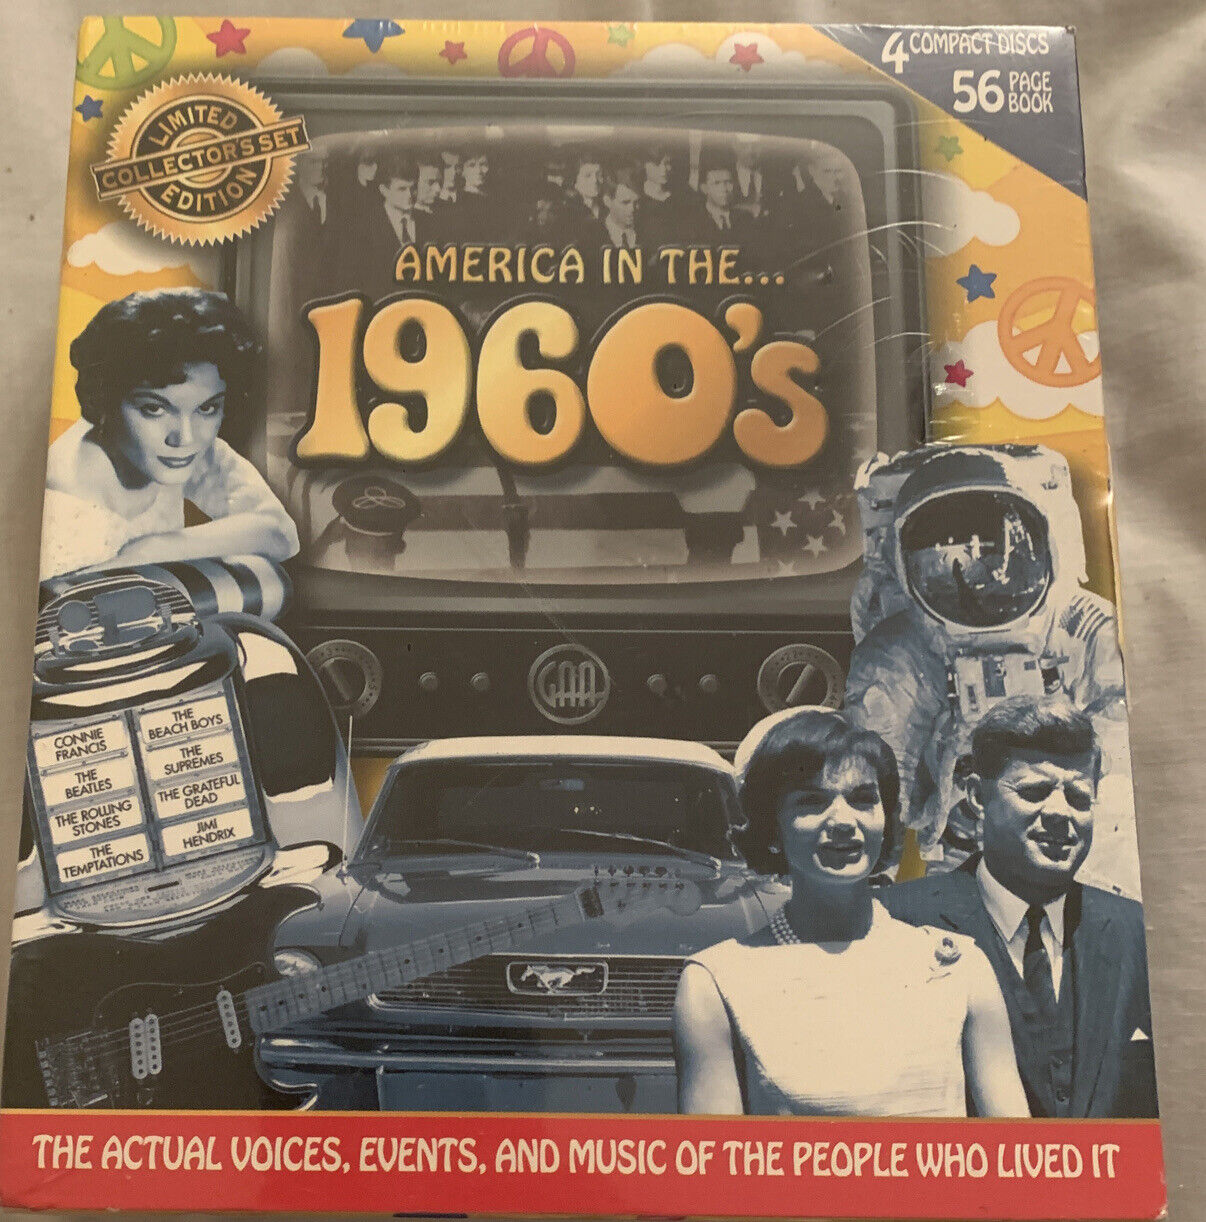 America In The 1960s  4 CDs +56 Page Book Great American Audio Brand New